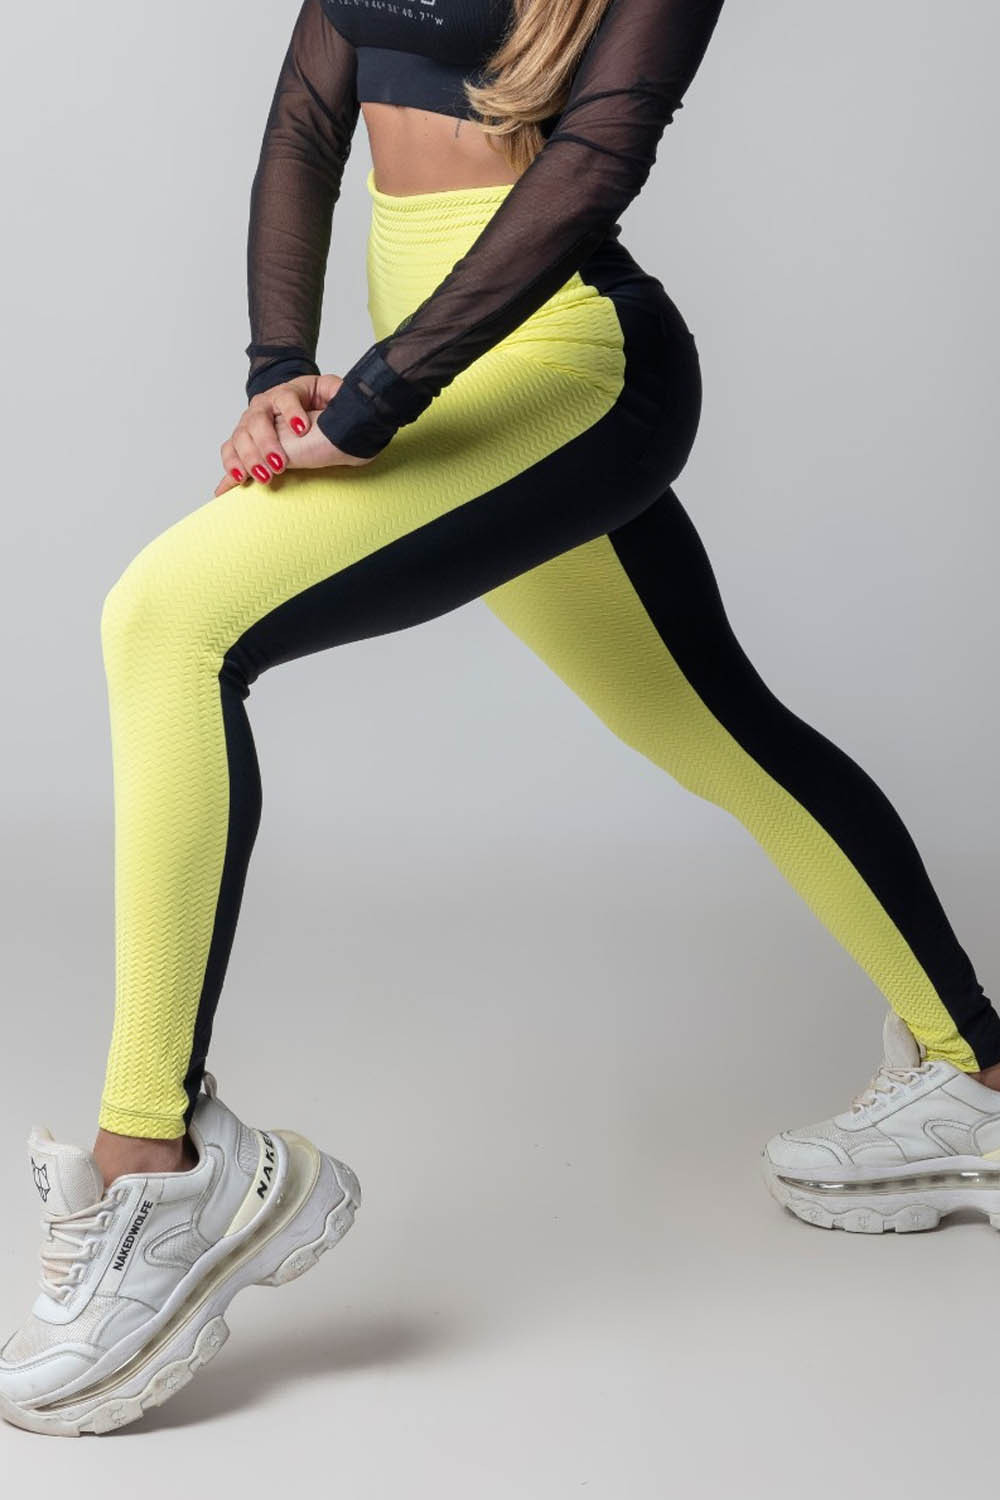 Black and Yellow Texturized Blogger leggings